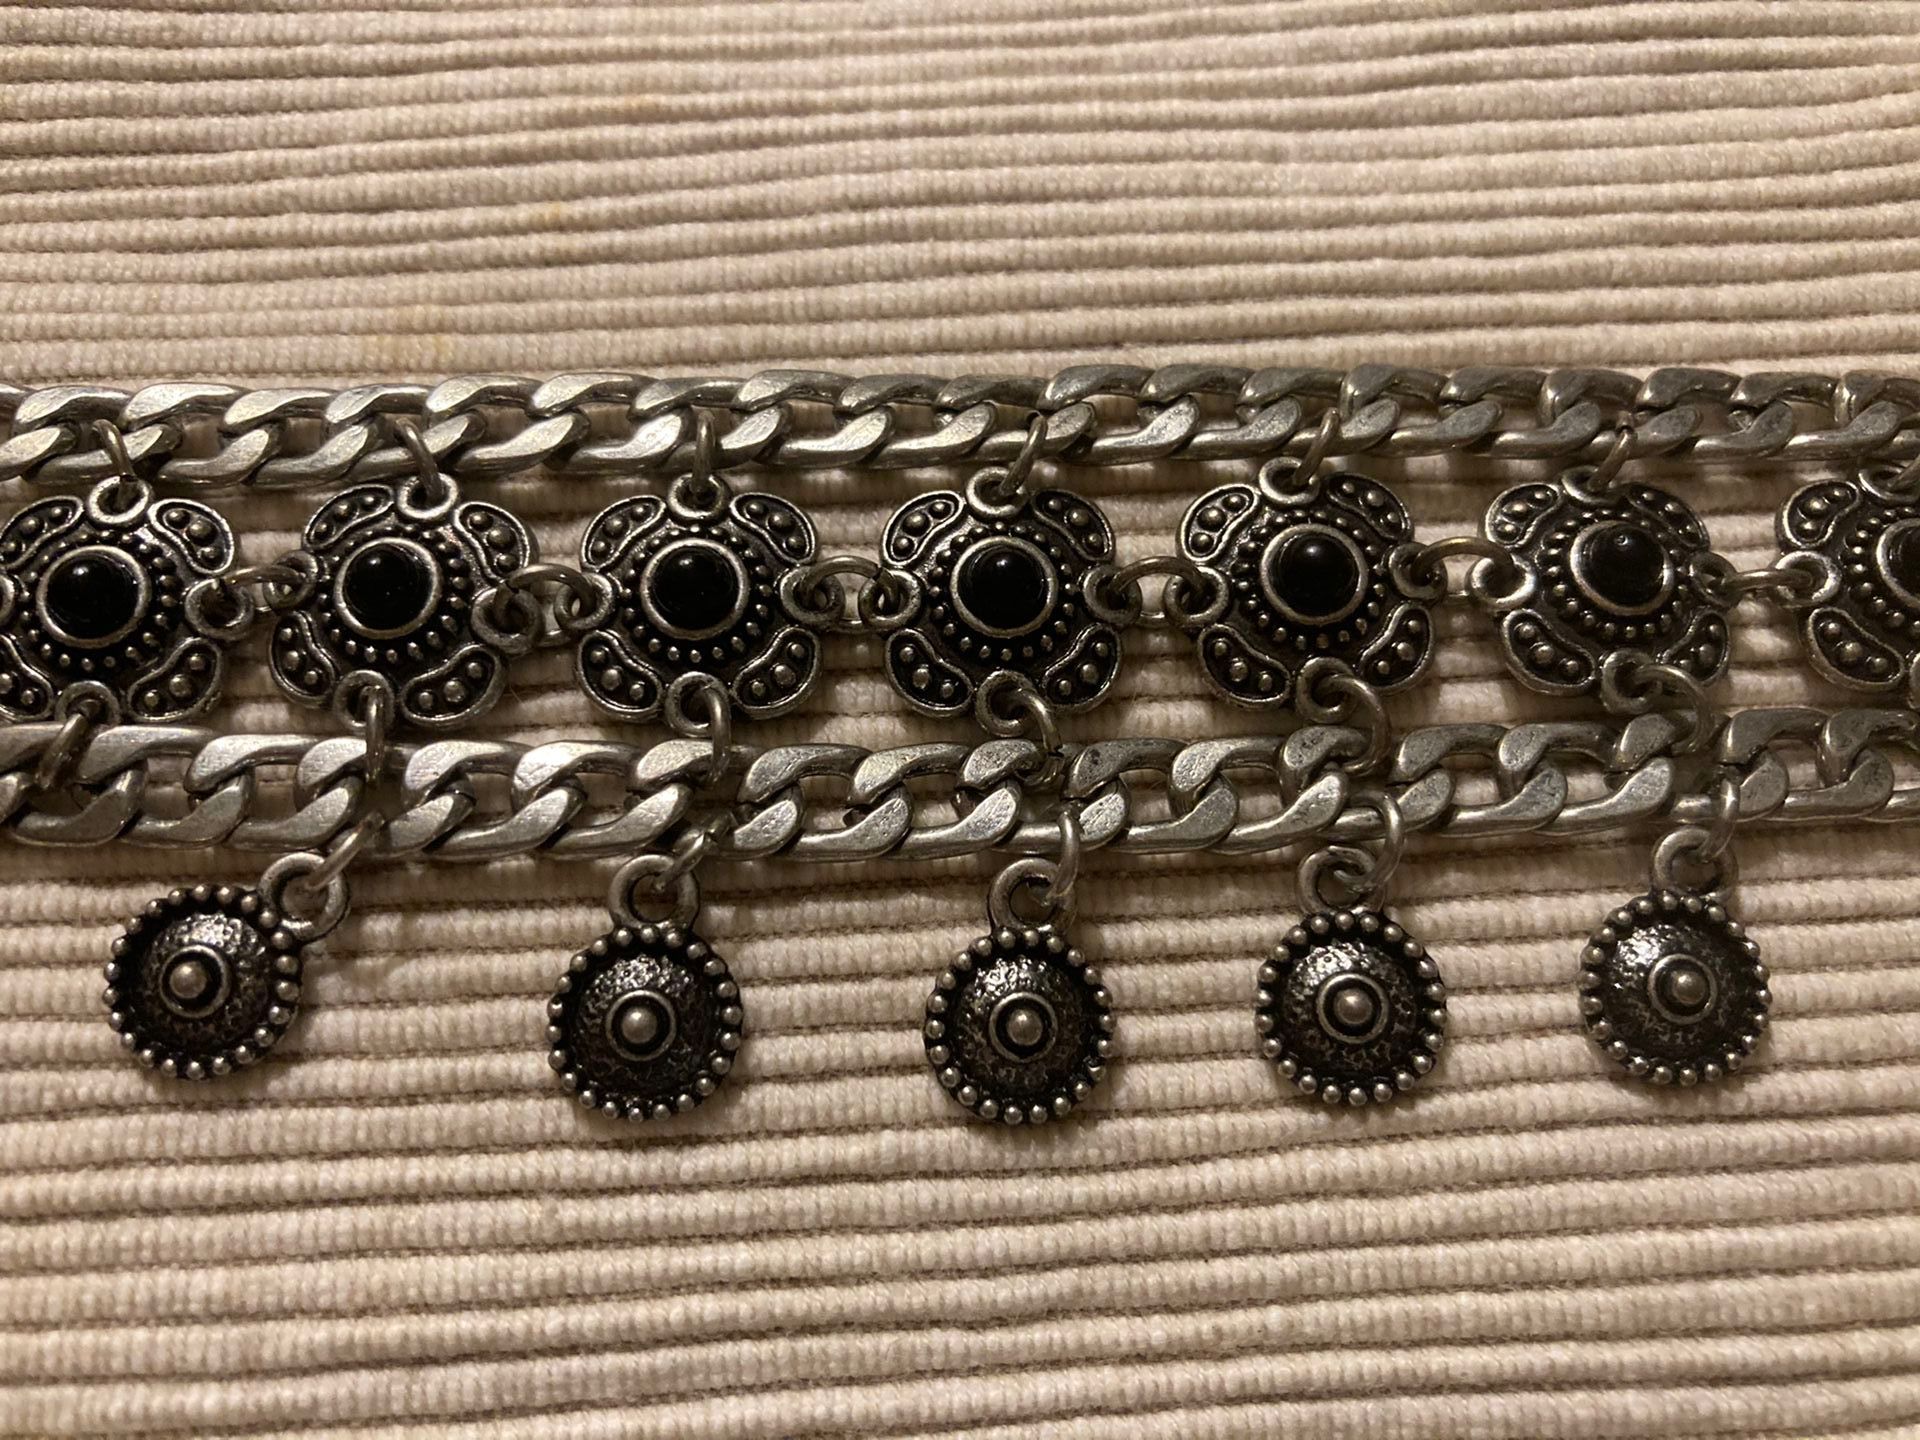 Silver Metal Choker Necklace With Black Marquesite Stones